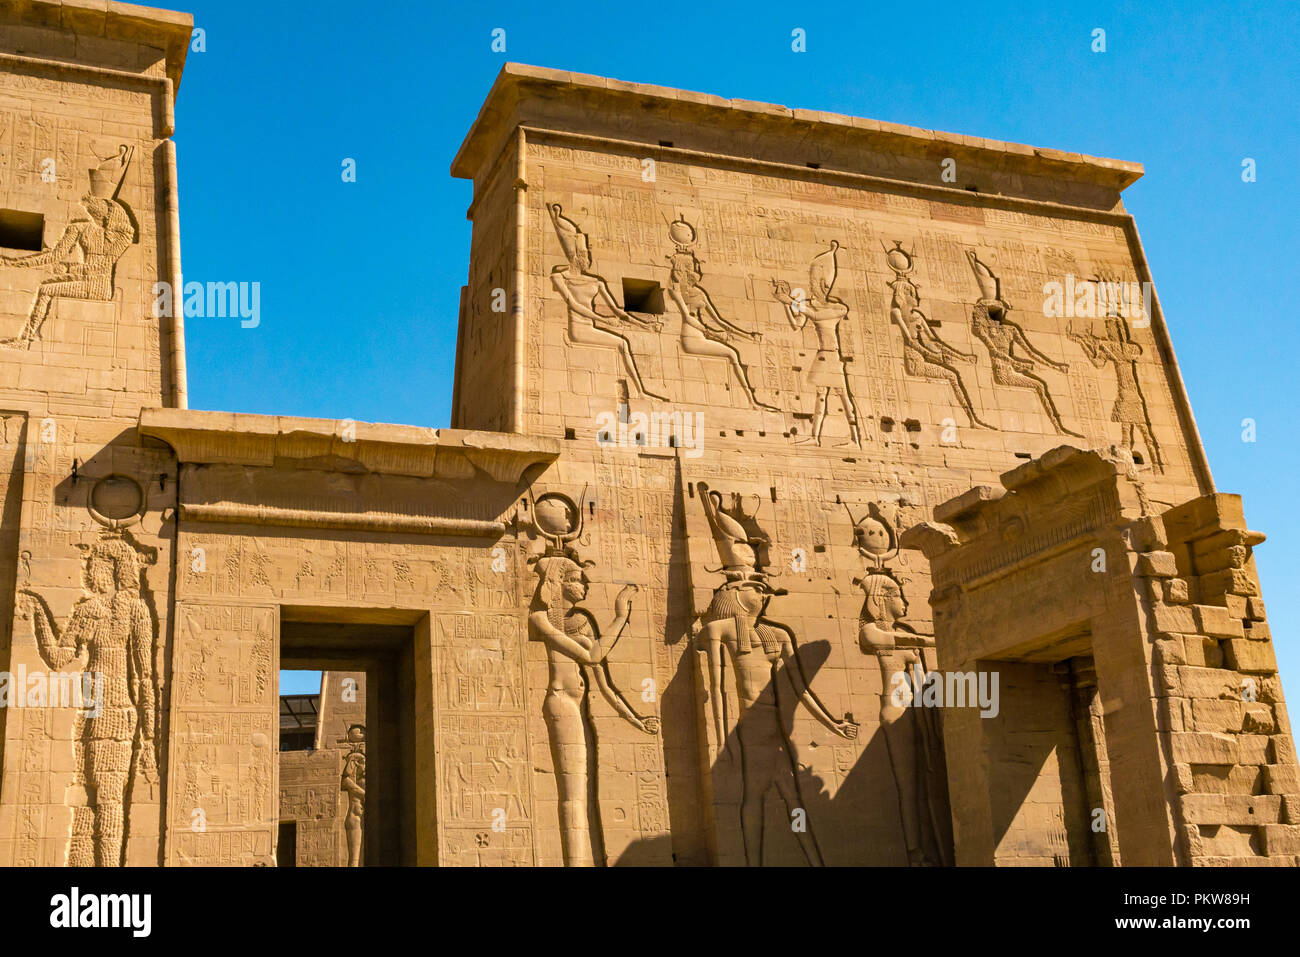 Outer pylon walls with carved Egyptian figures and hieroglyphs, Temple of Philae, Agilkia Island, River Nile, Aswan, Egypt, Africa Stock Photo